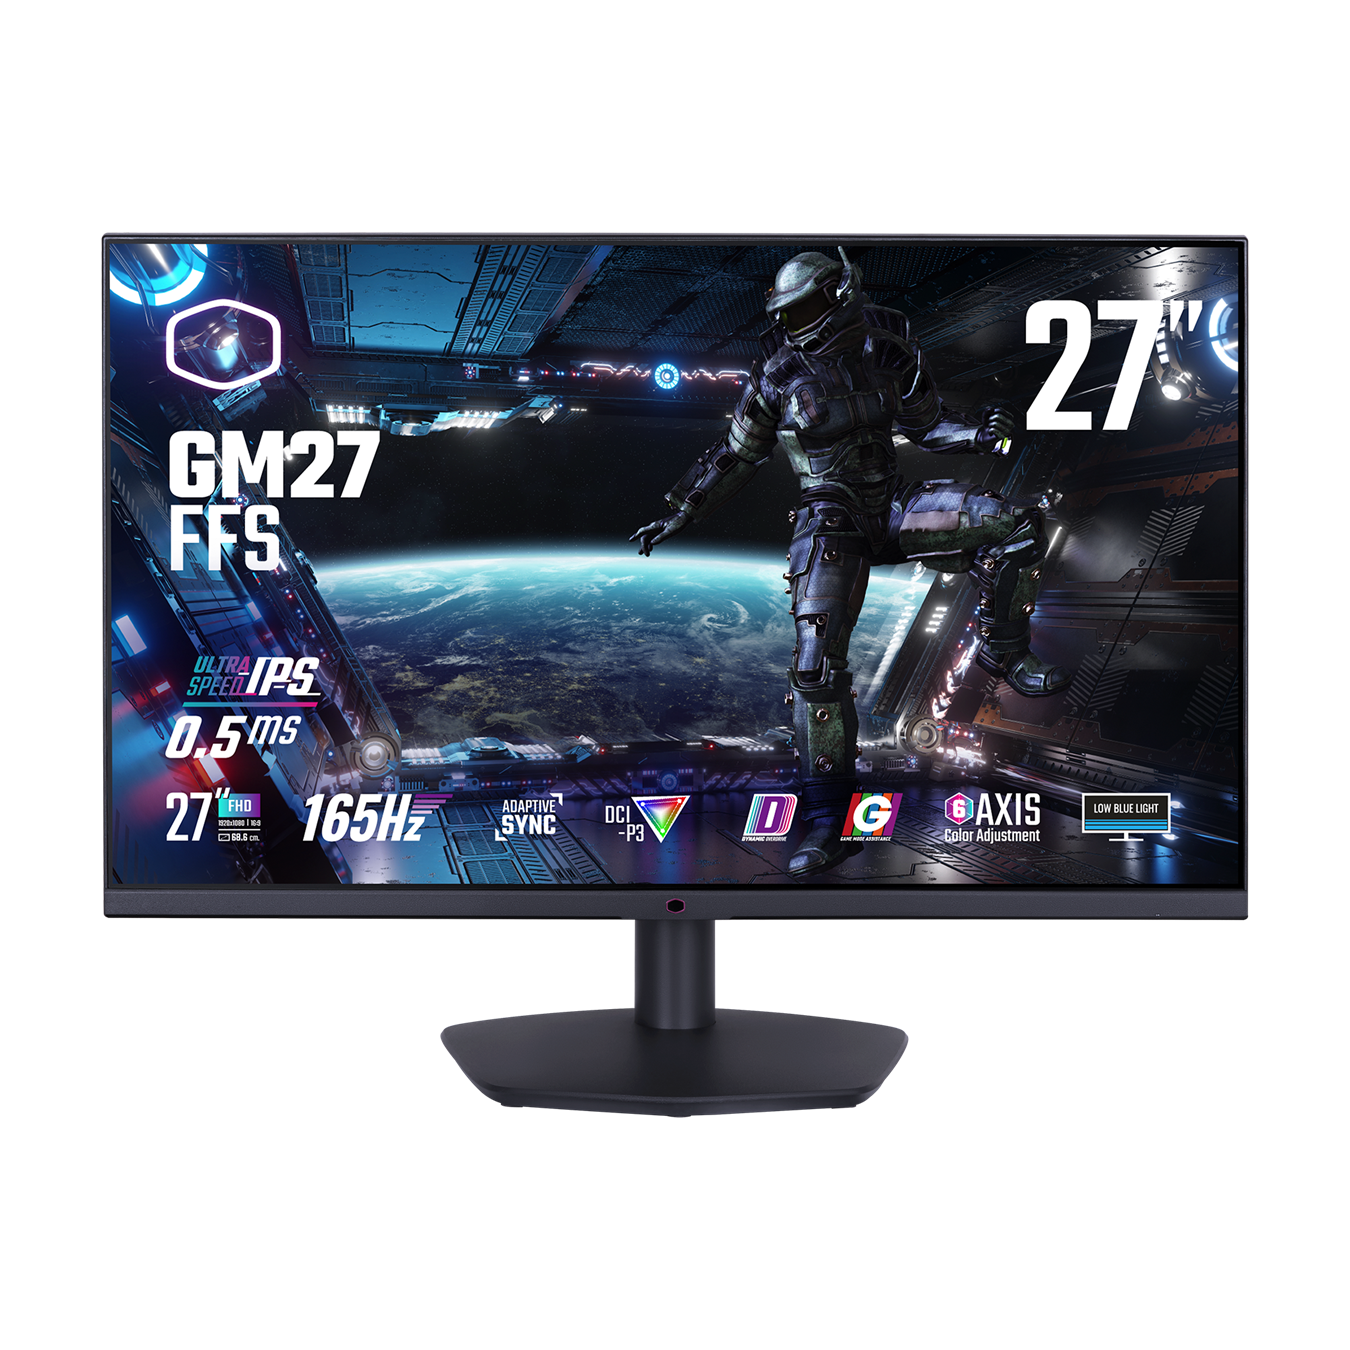 GM27-FFS Gaming Monitor - Features